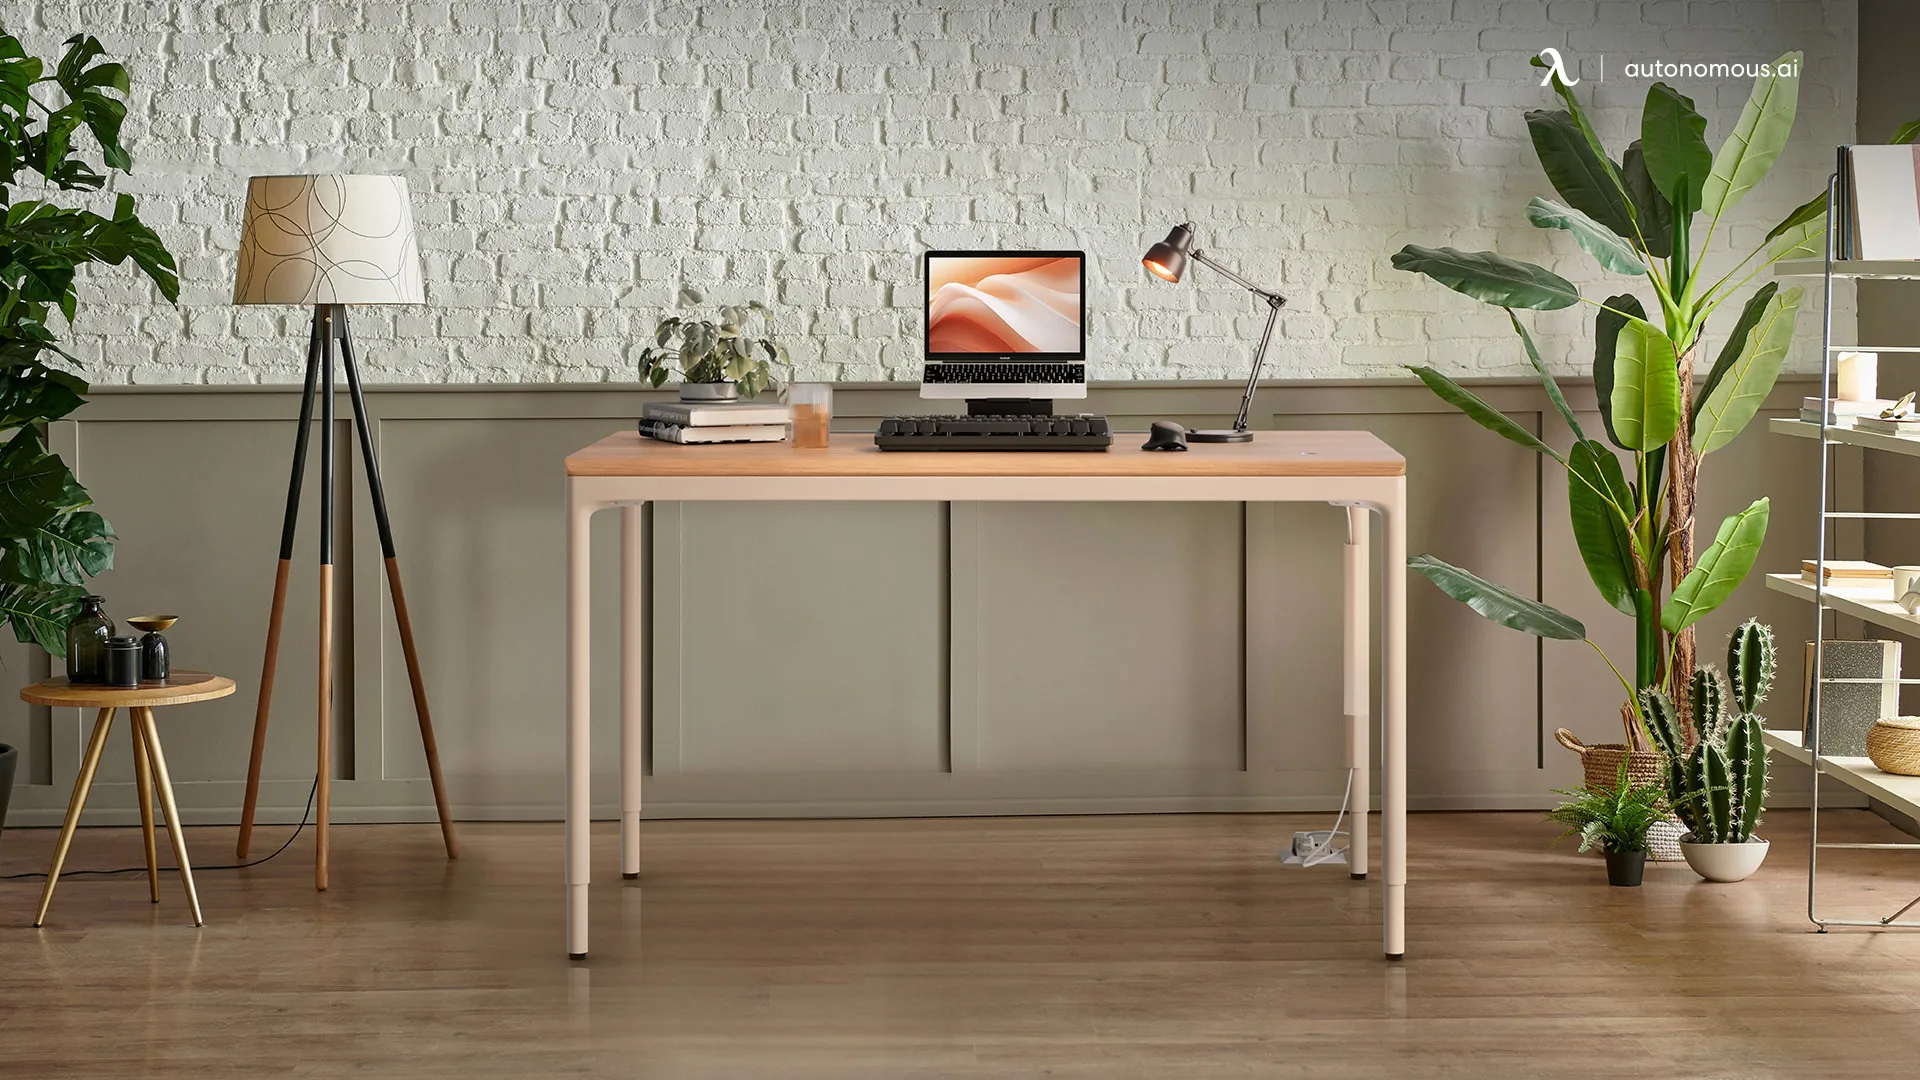 What are the standard desk dimensions in inches